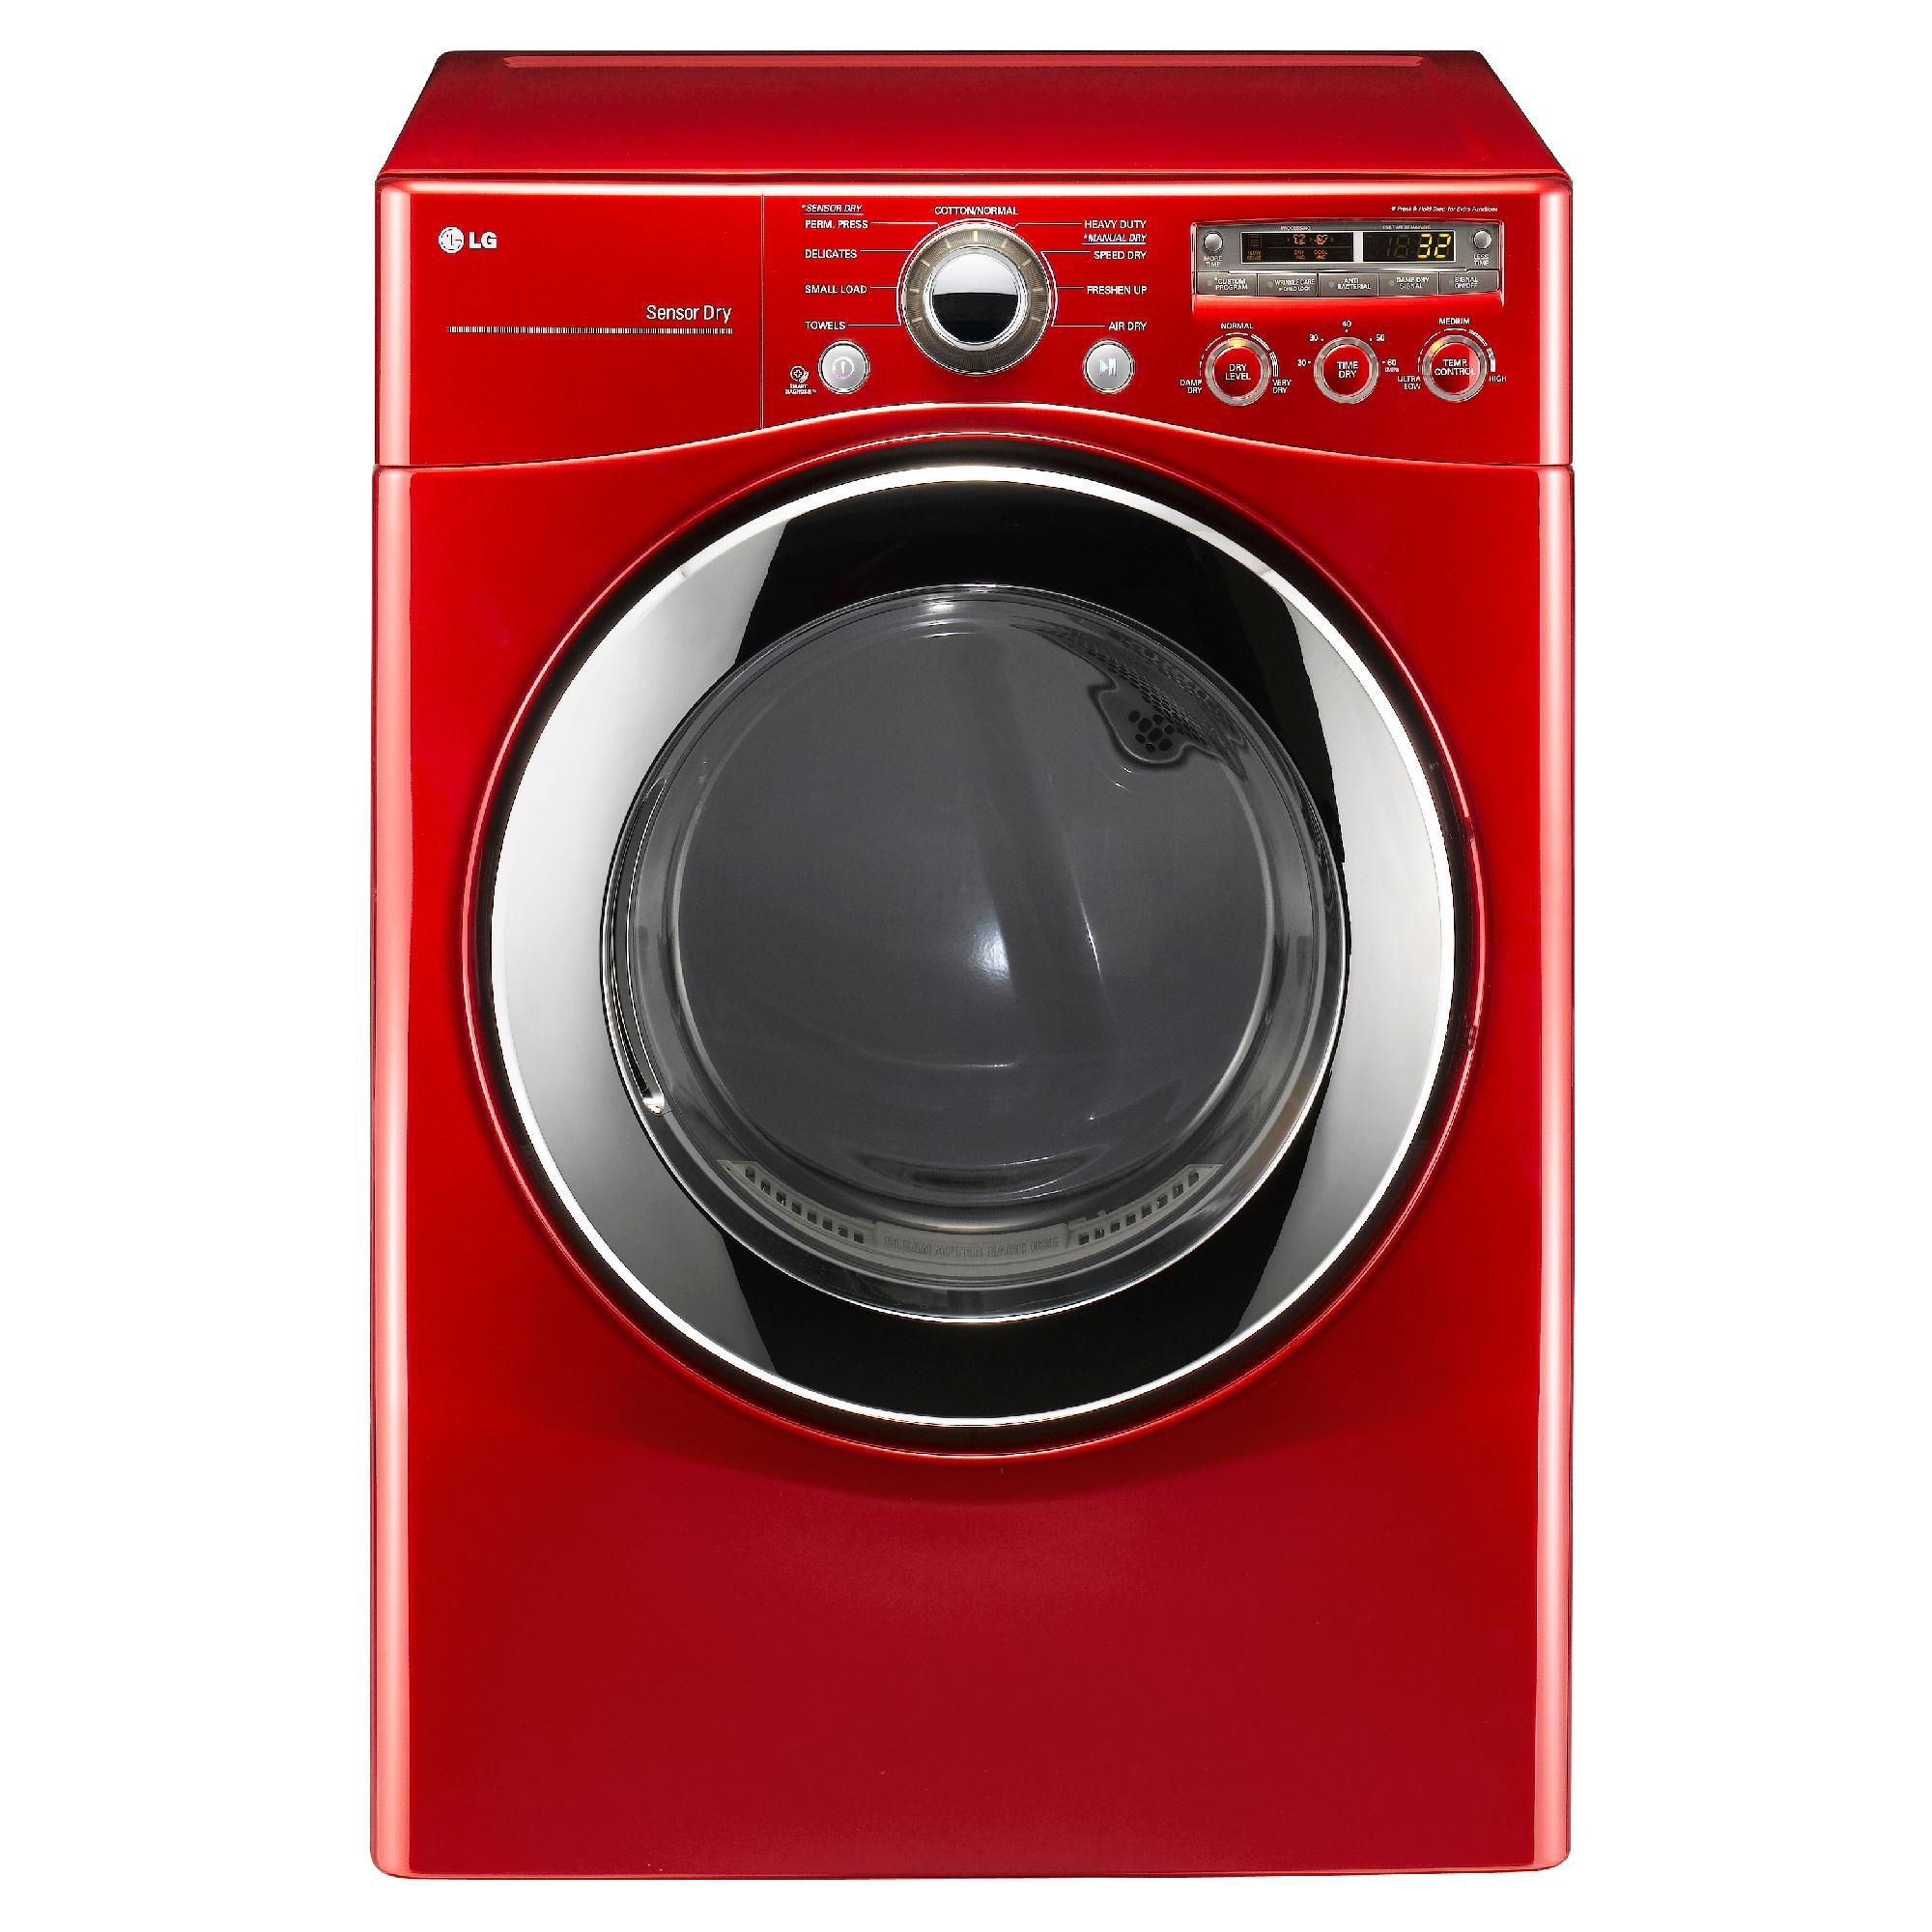 LG 7.3 cu. ft. Gas Dryer - Red